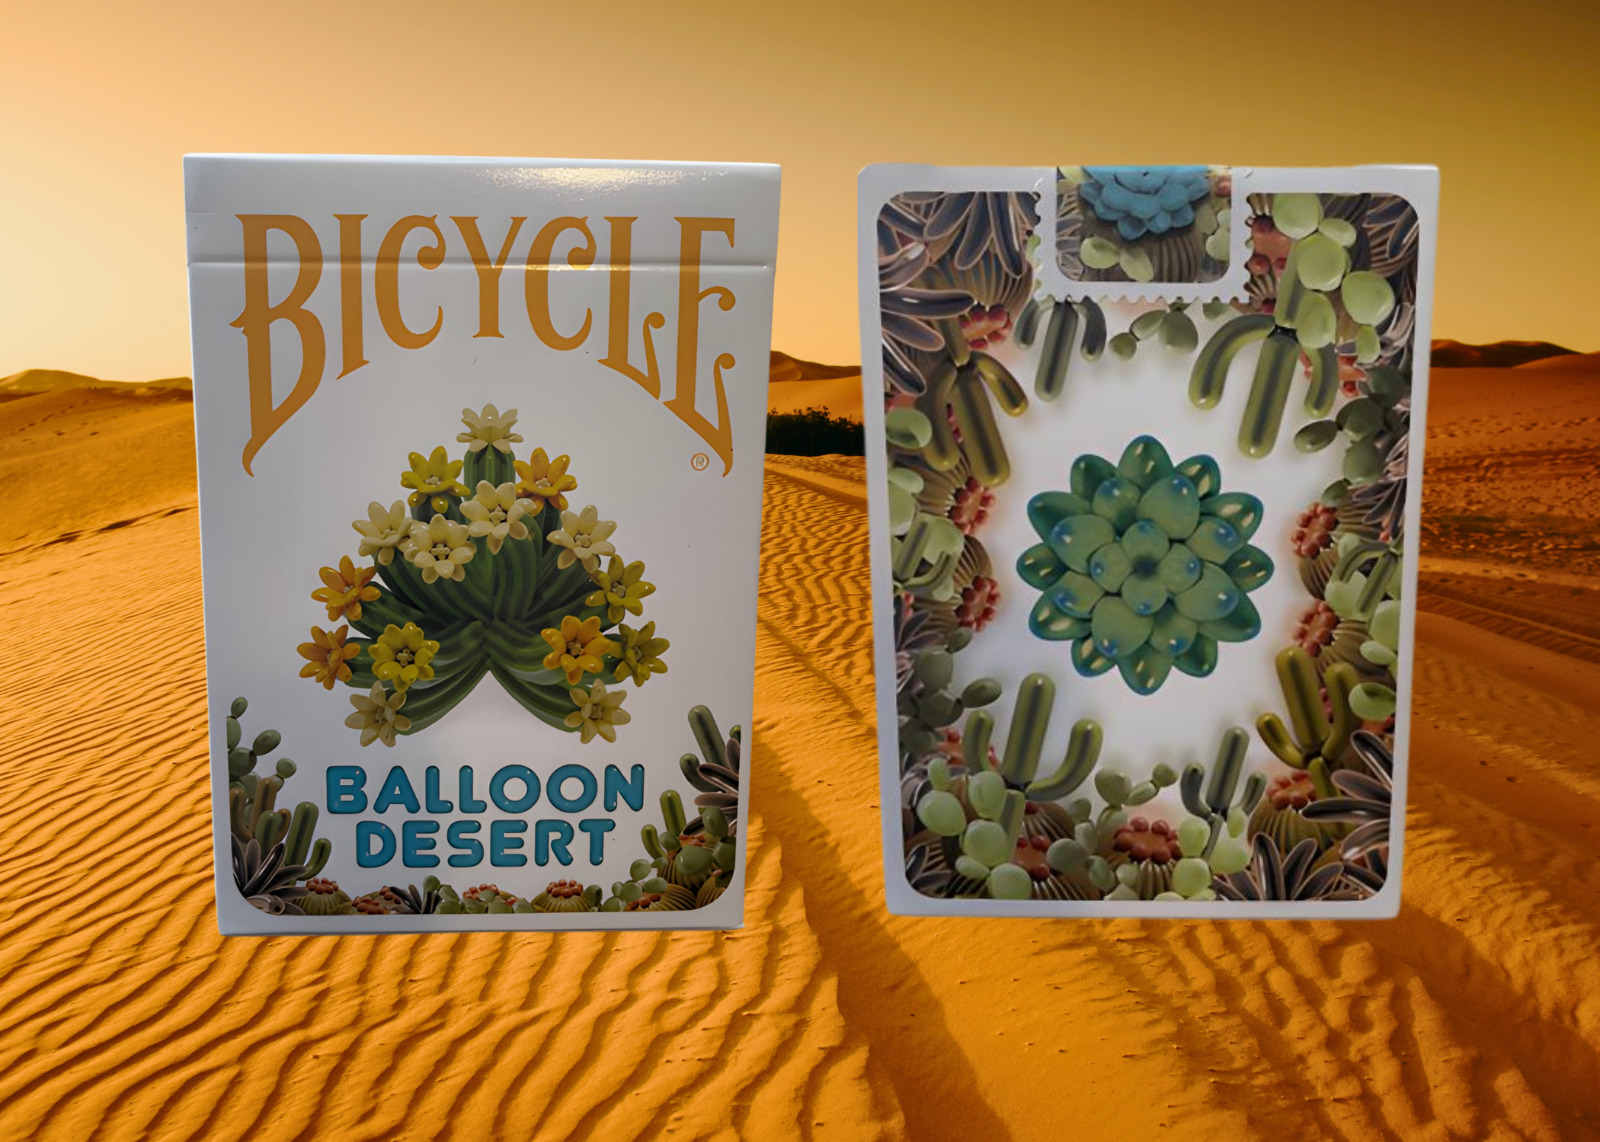 Limited Edition Bicycle Balloon Desert Animals Playing Cards